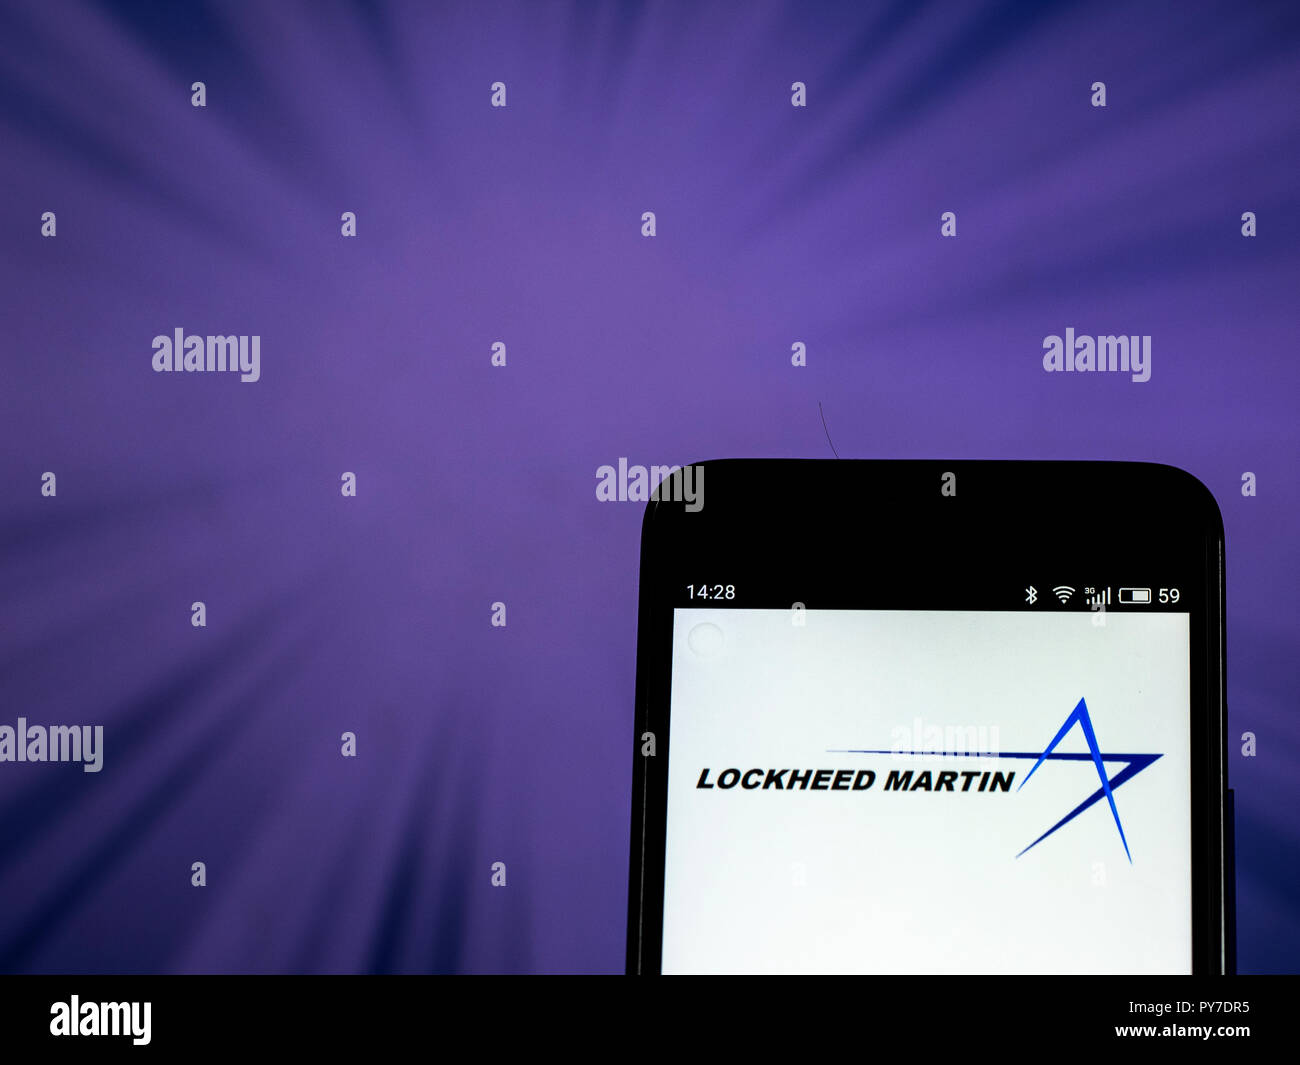 Lockheed Martin Aerospace and defense company logo seen displayed on smart phone. Lockheed Martin Corporation is an American global aerospace, defense, security and advanced technologies company with worldwide interests. Stock Photo